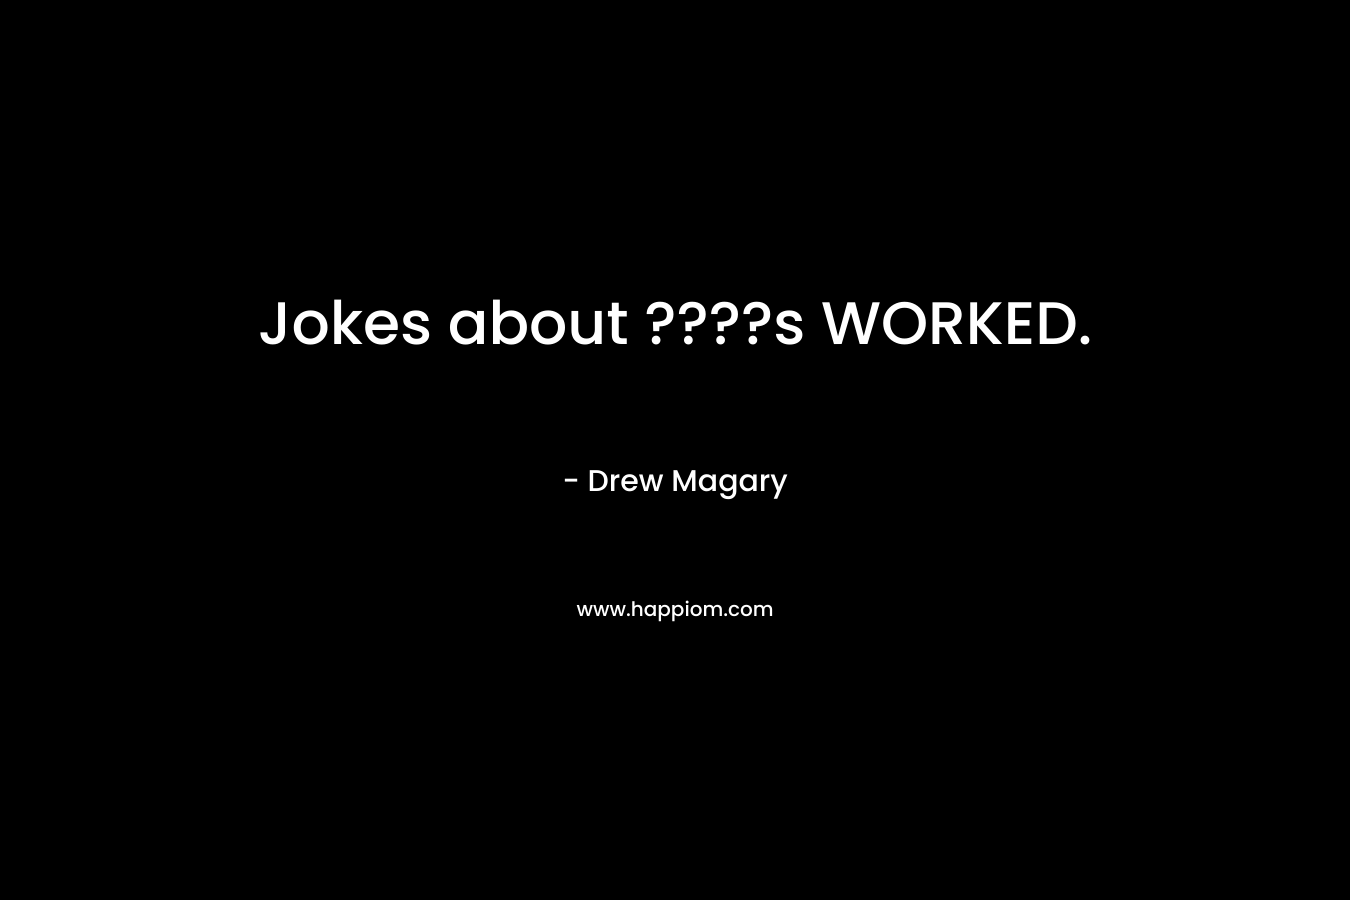 Jokes about ????s WORKED. – Drew Magary